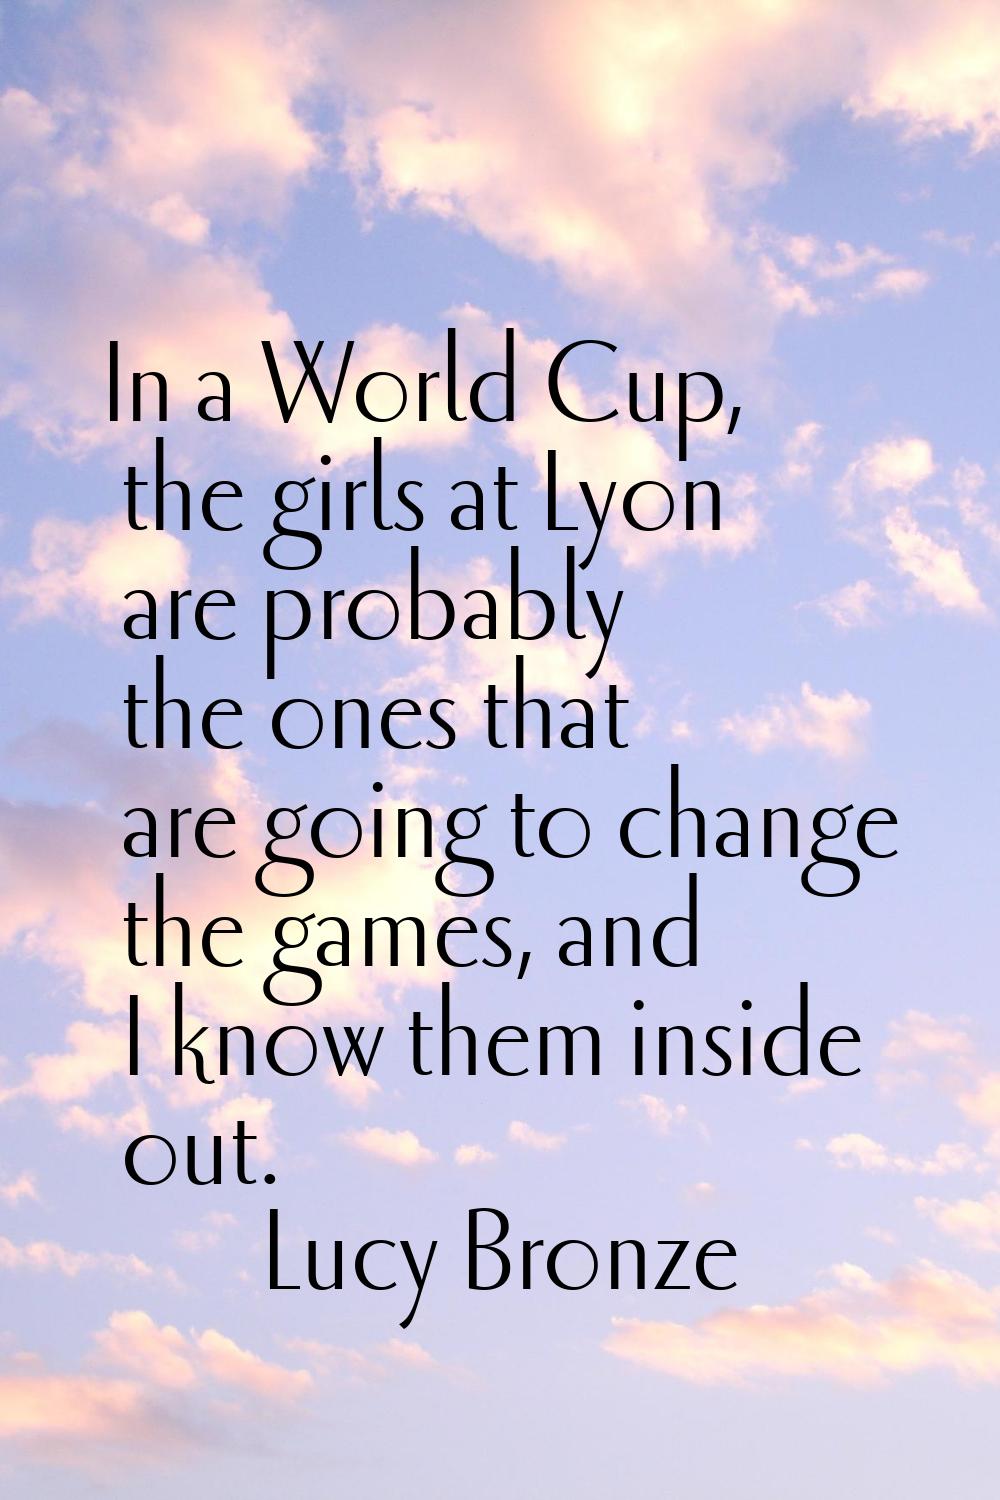 In a World Cup, the girls at Lyon are probably the ones that are going to change the games, and I k